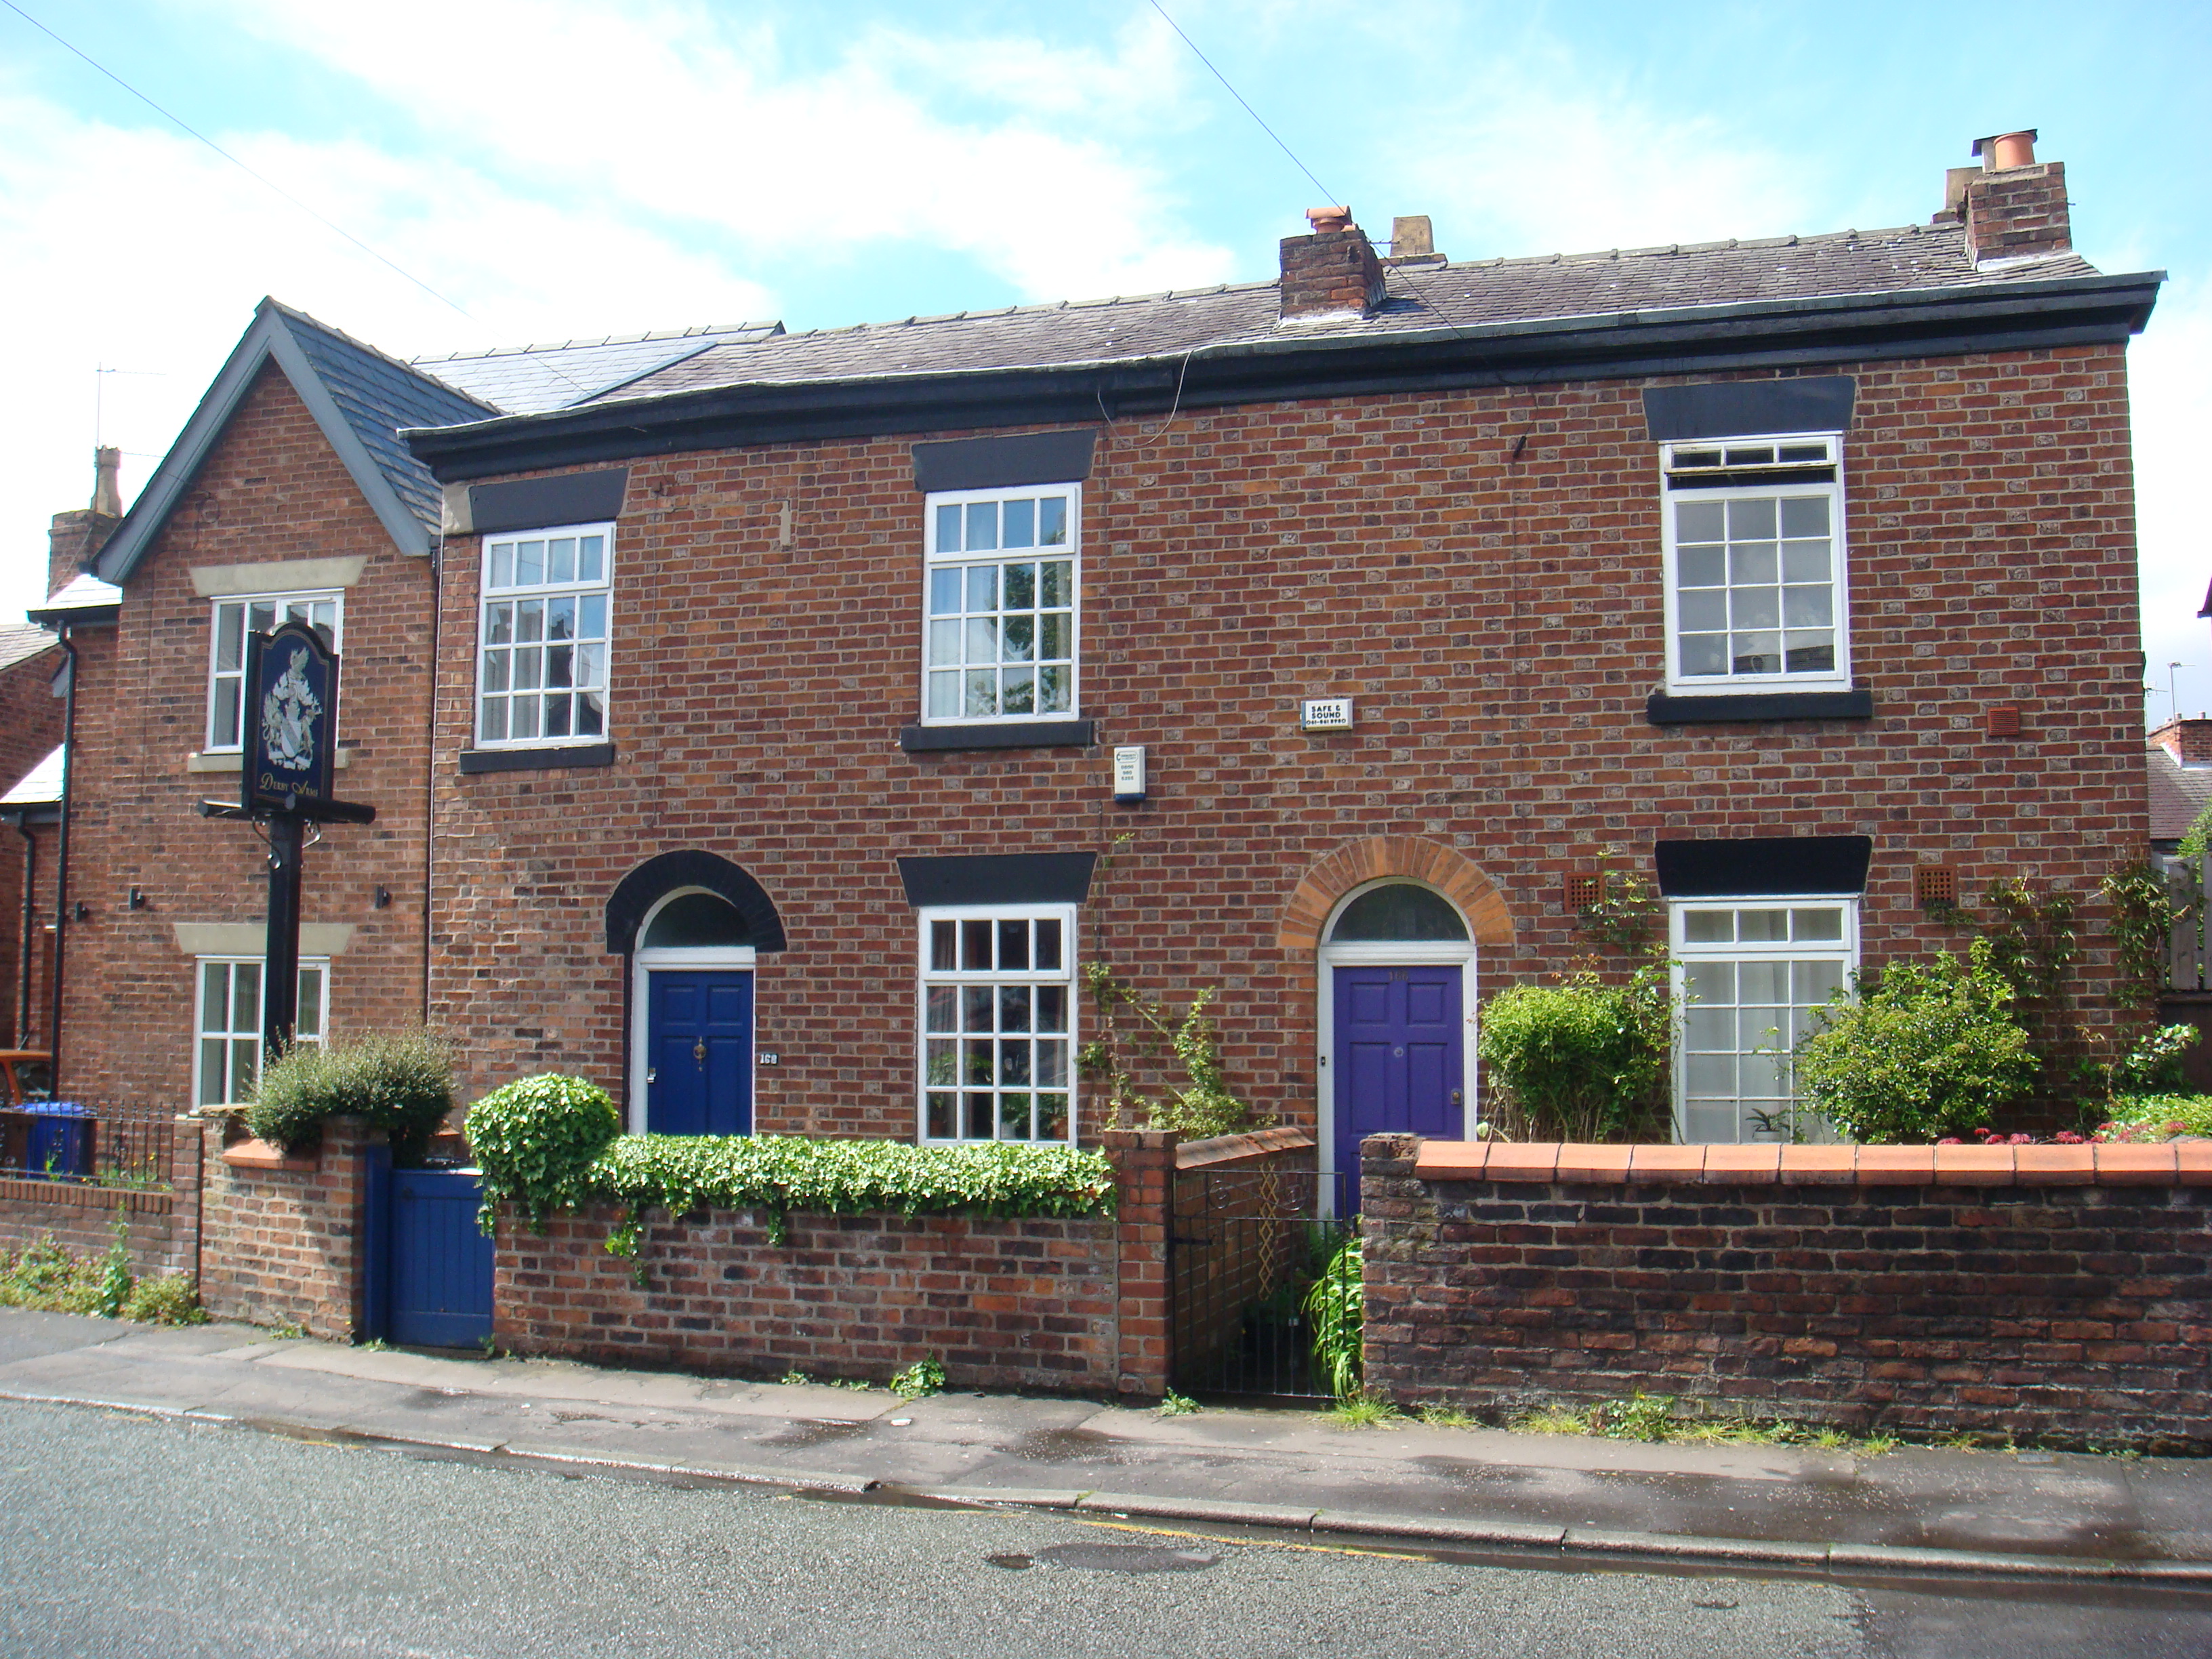 Cottages and houses, Ladybarn Manchester